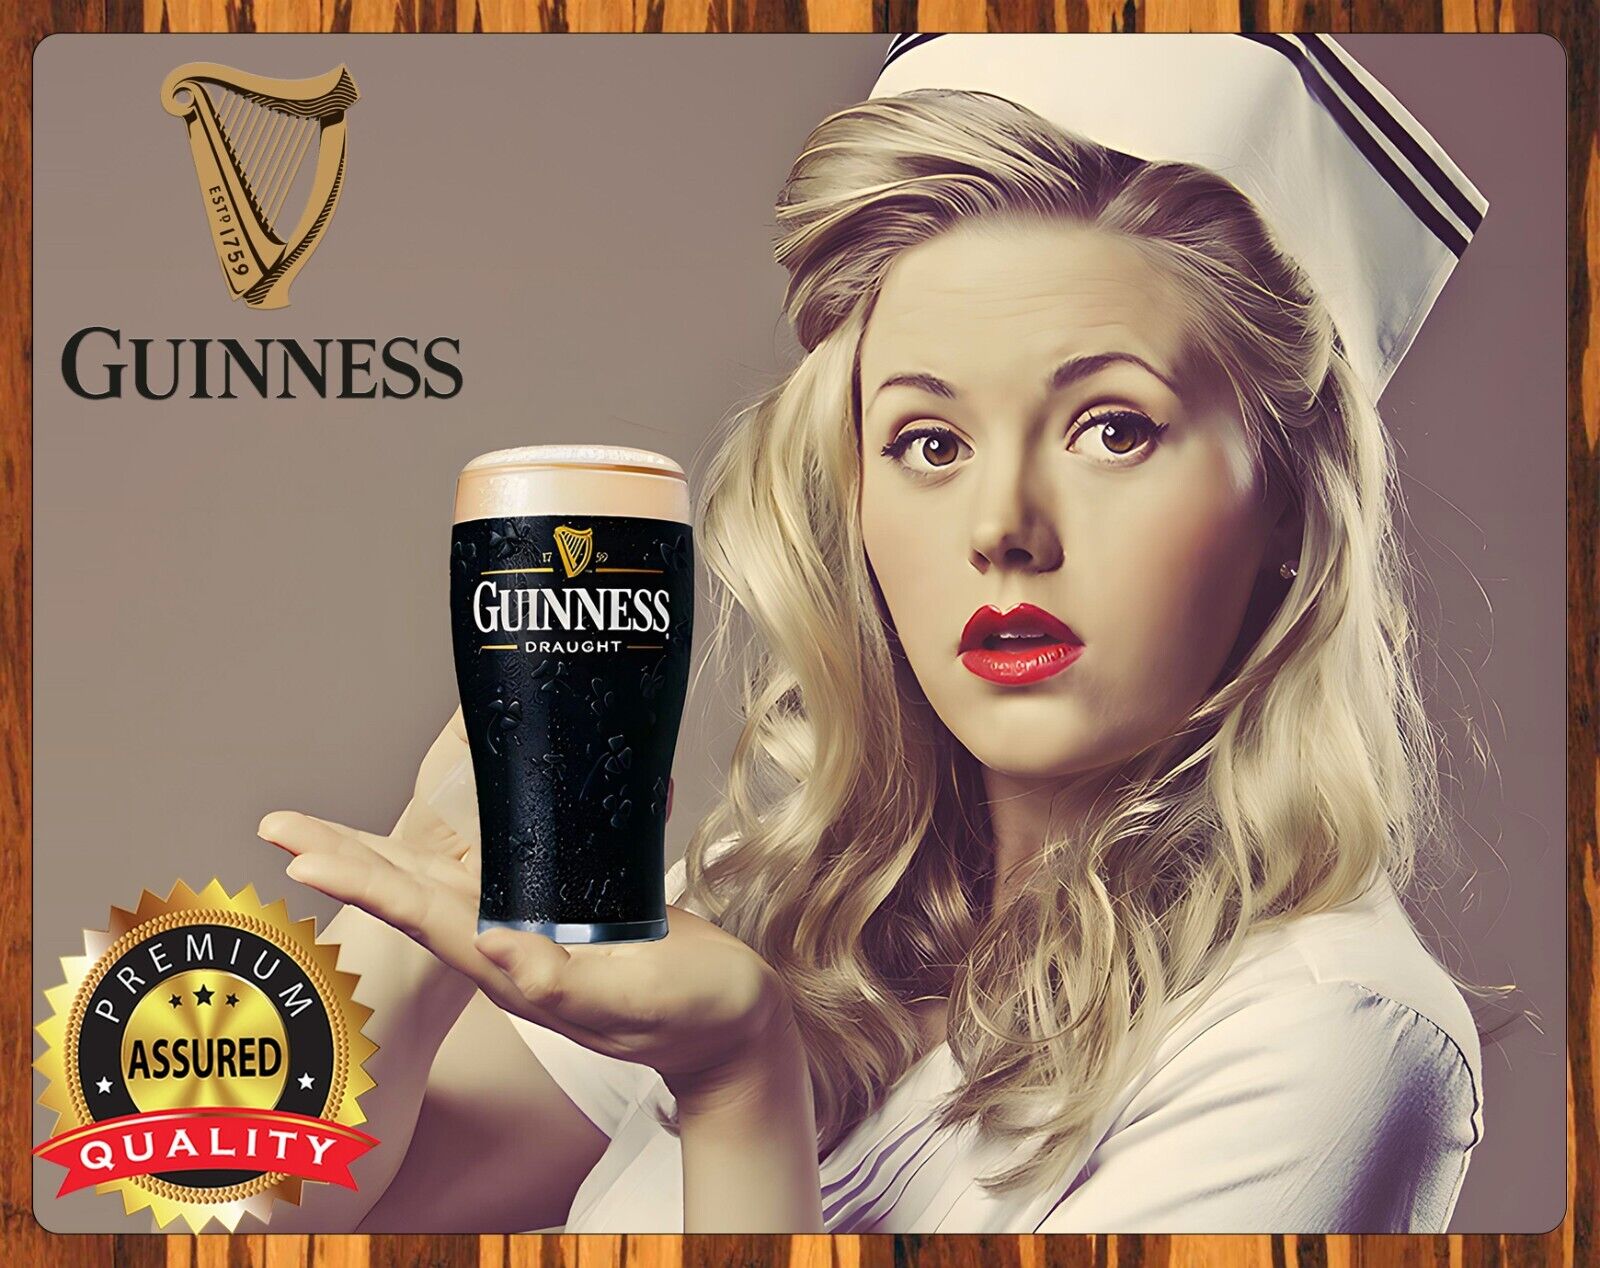 Guinness Beer - Guinness Draught Is Good For You  - Metal Sign 11 x 14